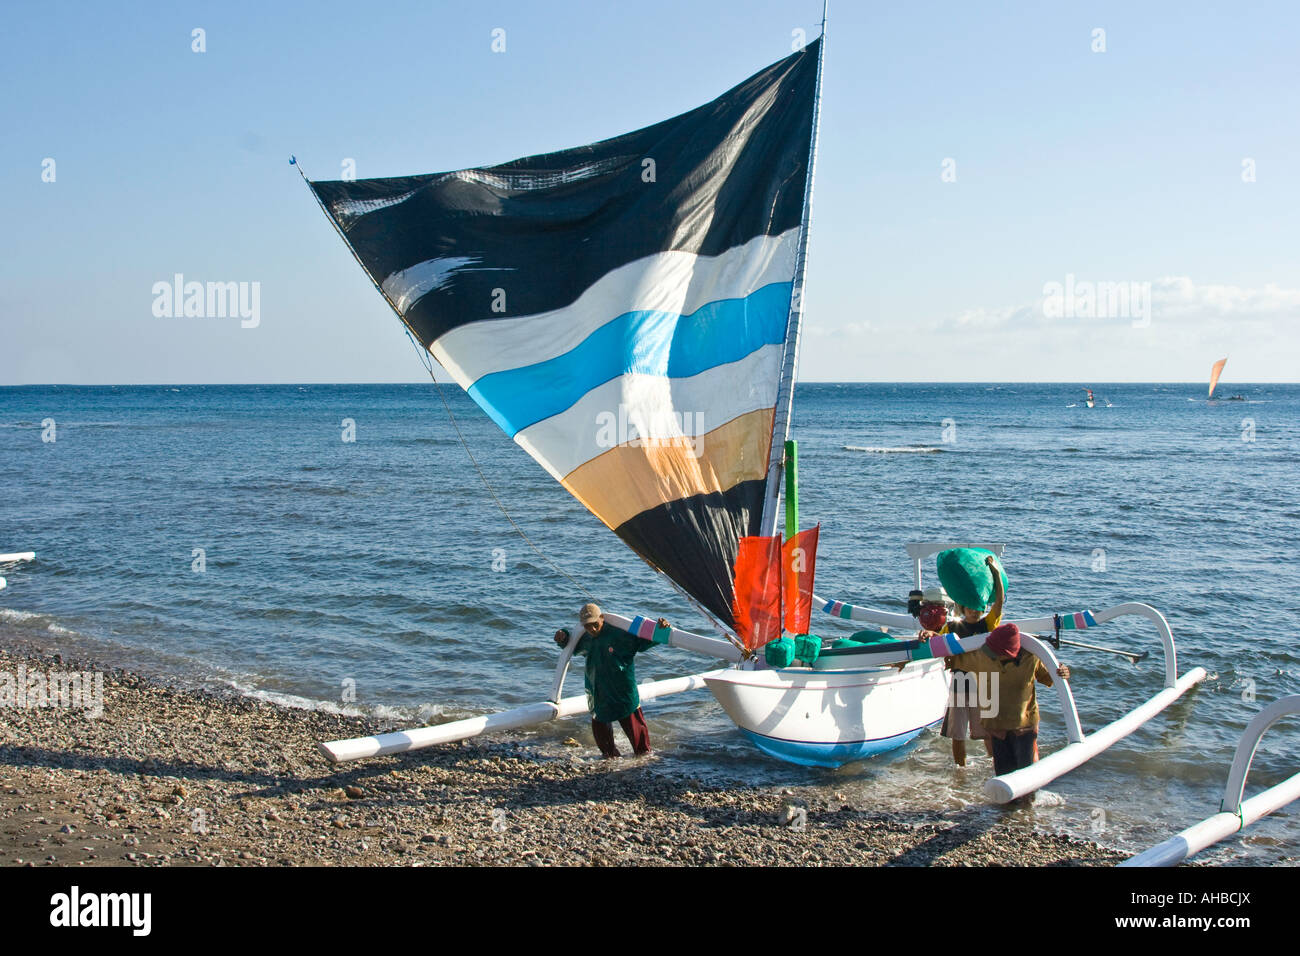 Jukung or Traditional Outrigger Fishing Sailboat Returning from Sea, Amed, Bali, Indonesia Stock Photo